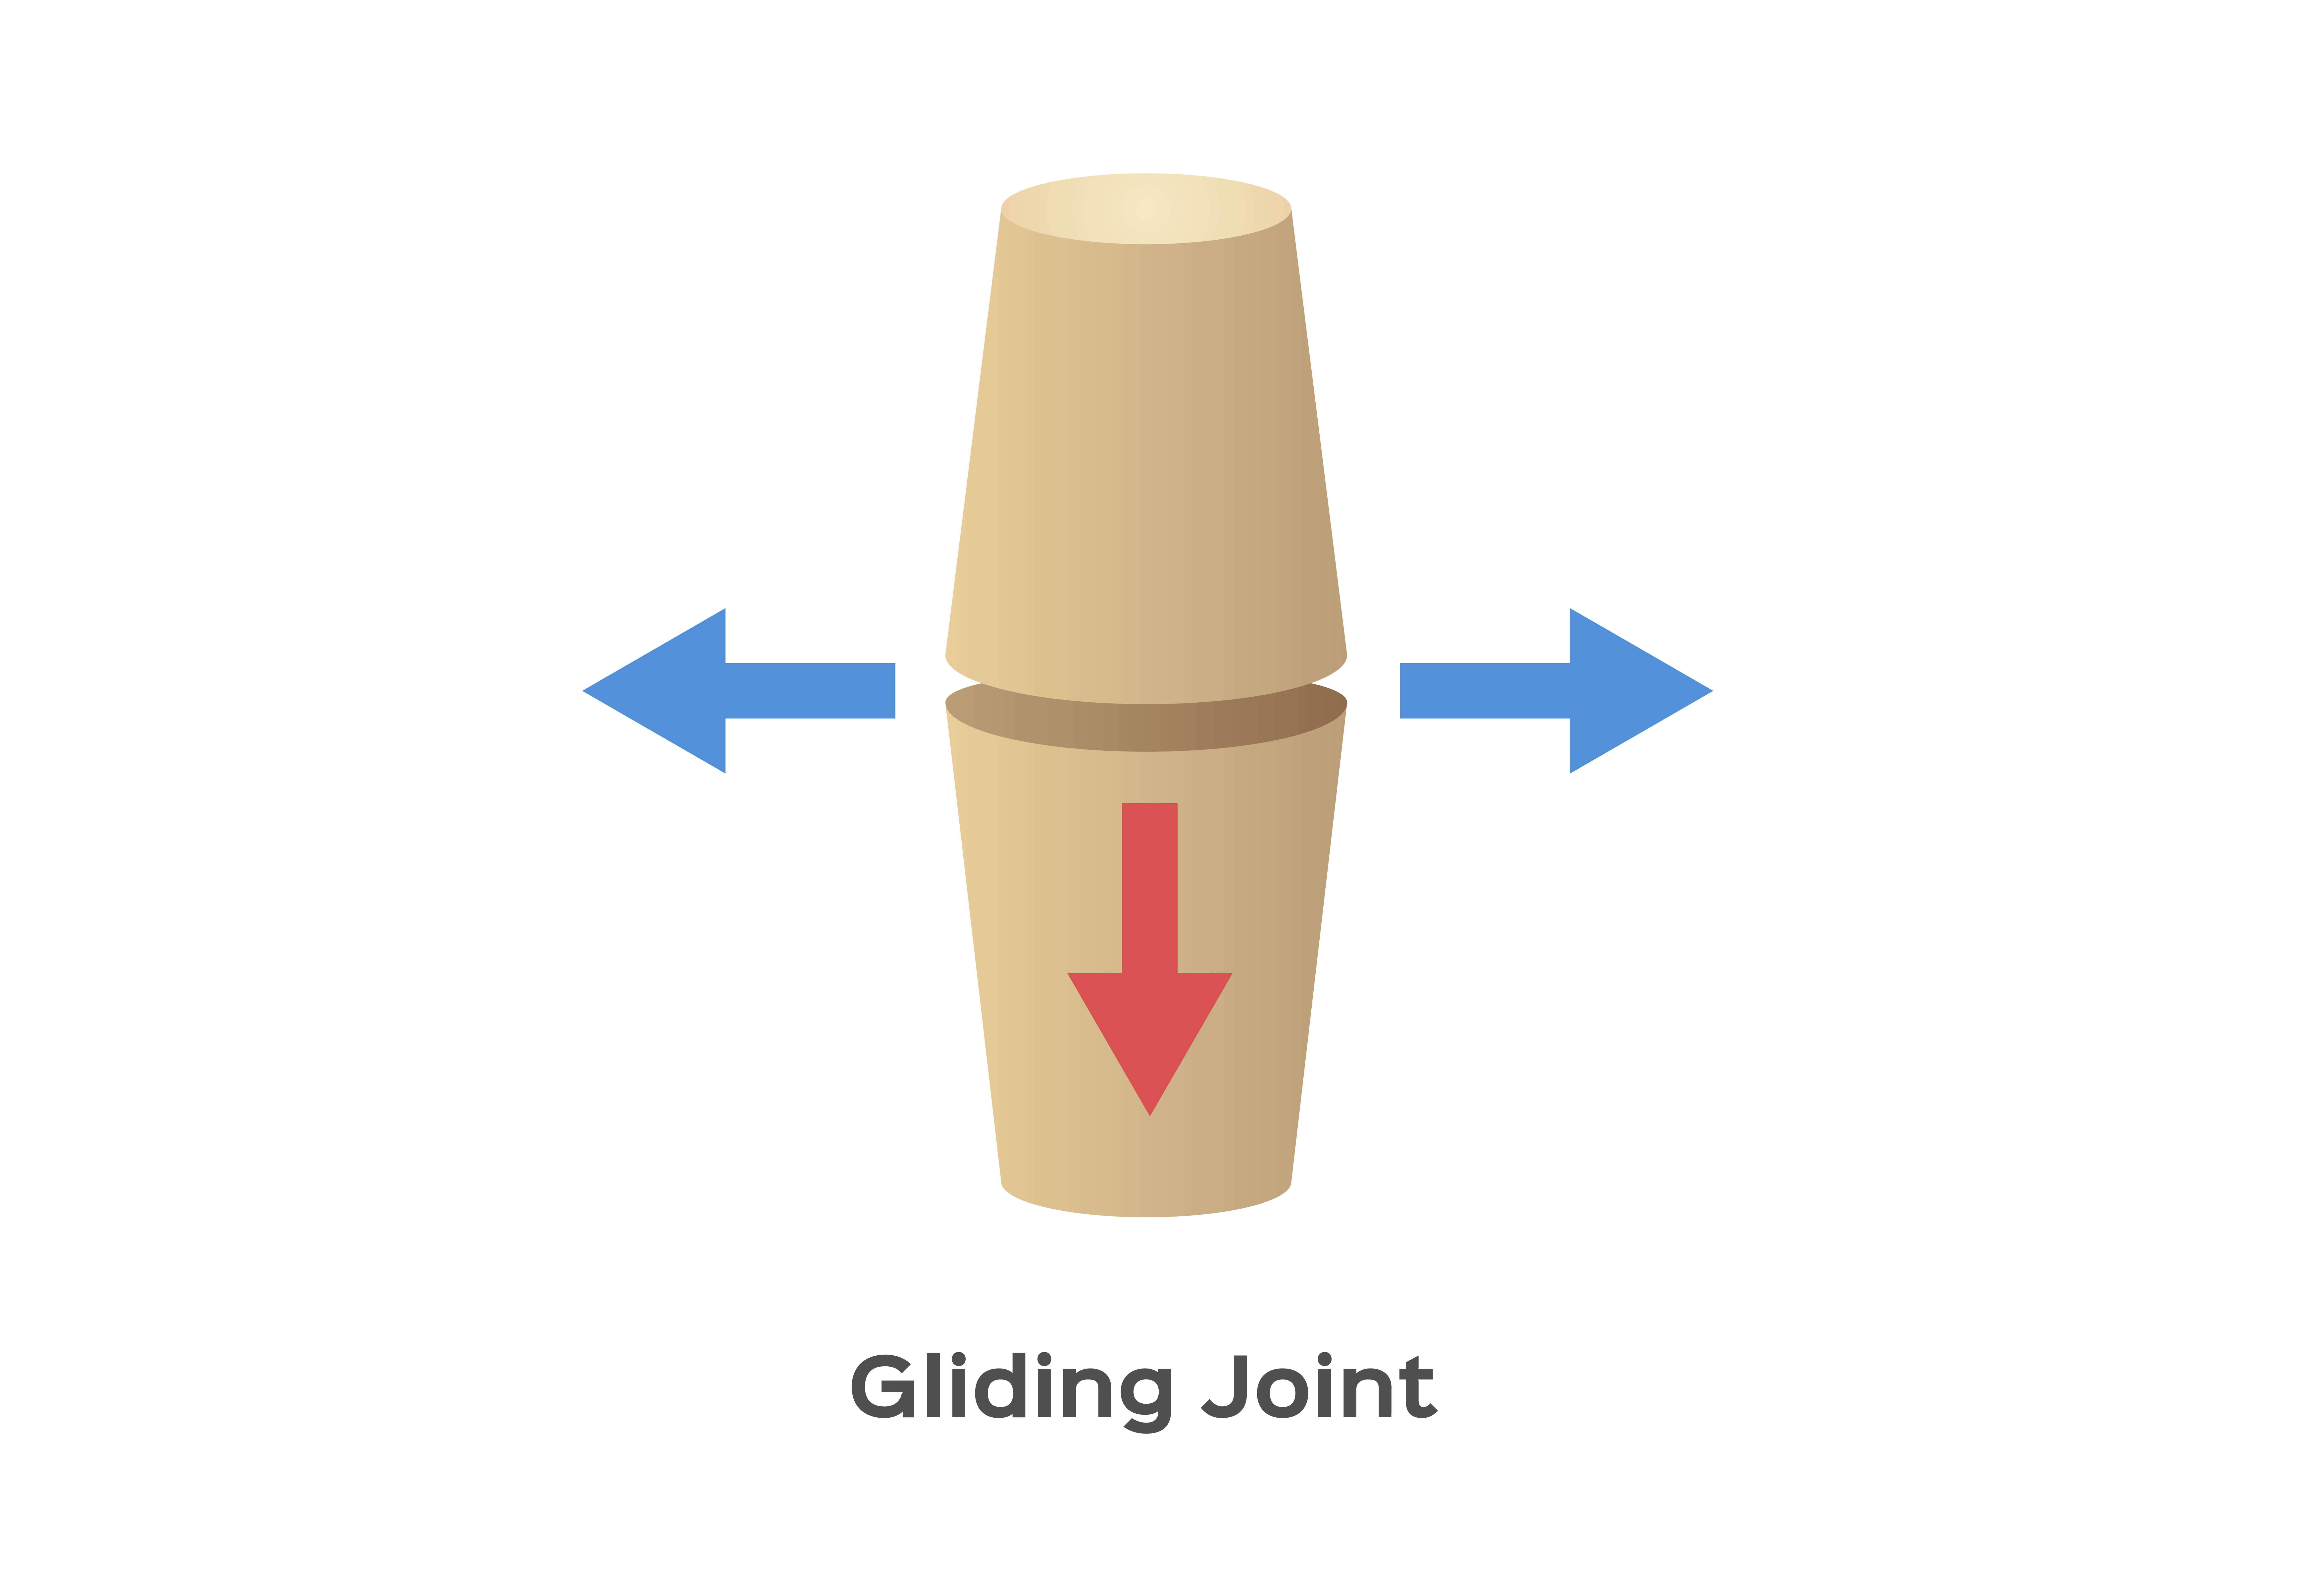 What Are Gliding Joints Understanding the Way Our Bodies Move